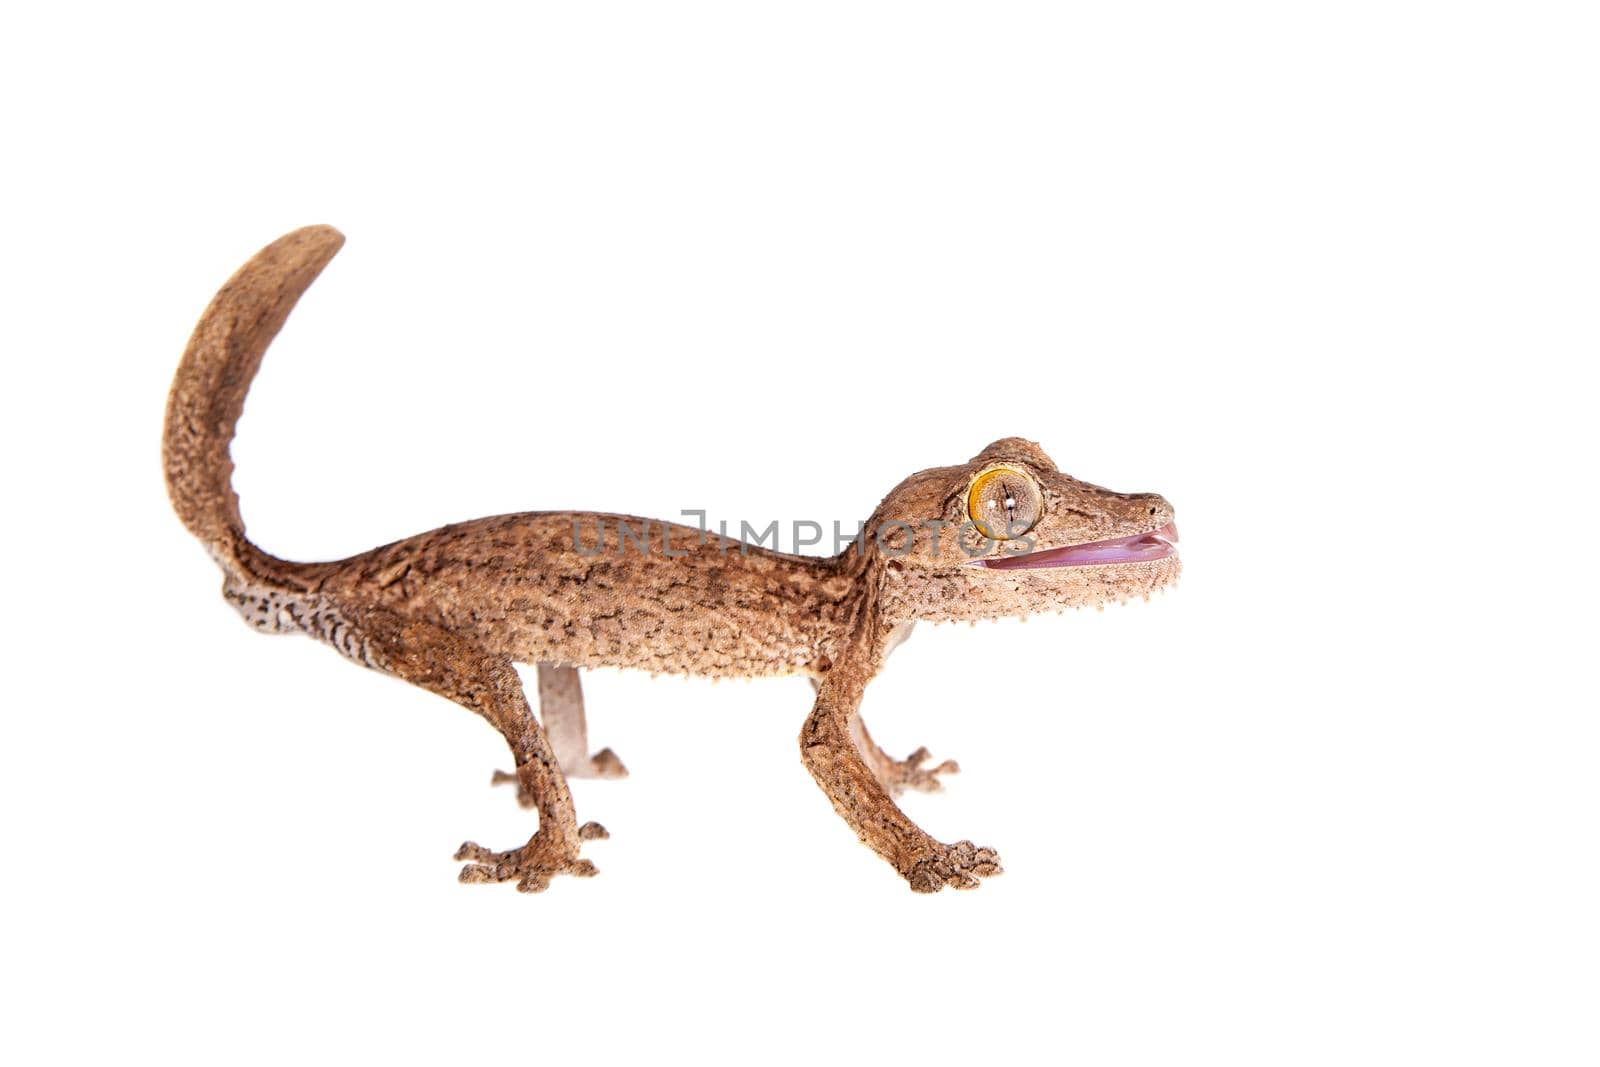 Leaf-toed gecko, unknow uroplatus, on white by RosaJay